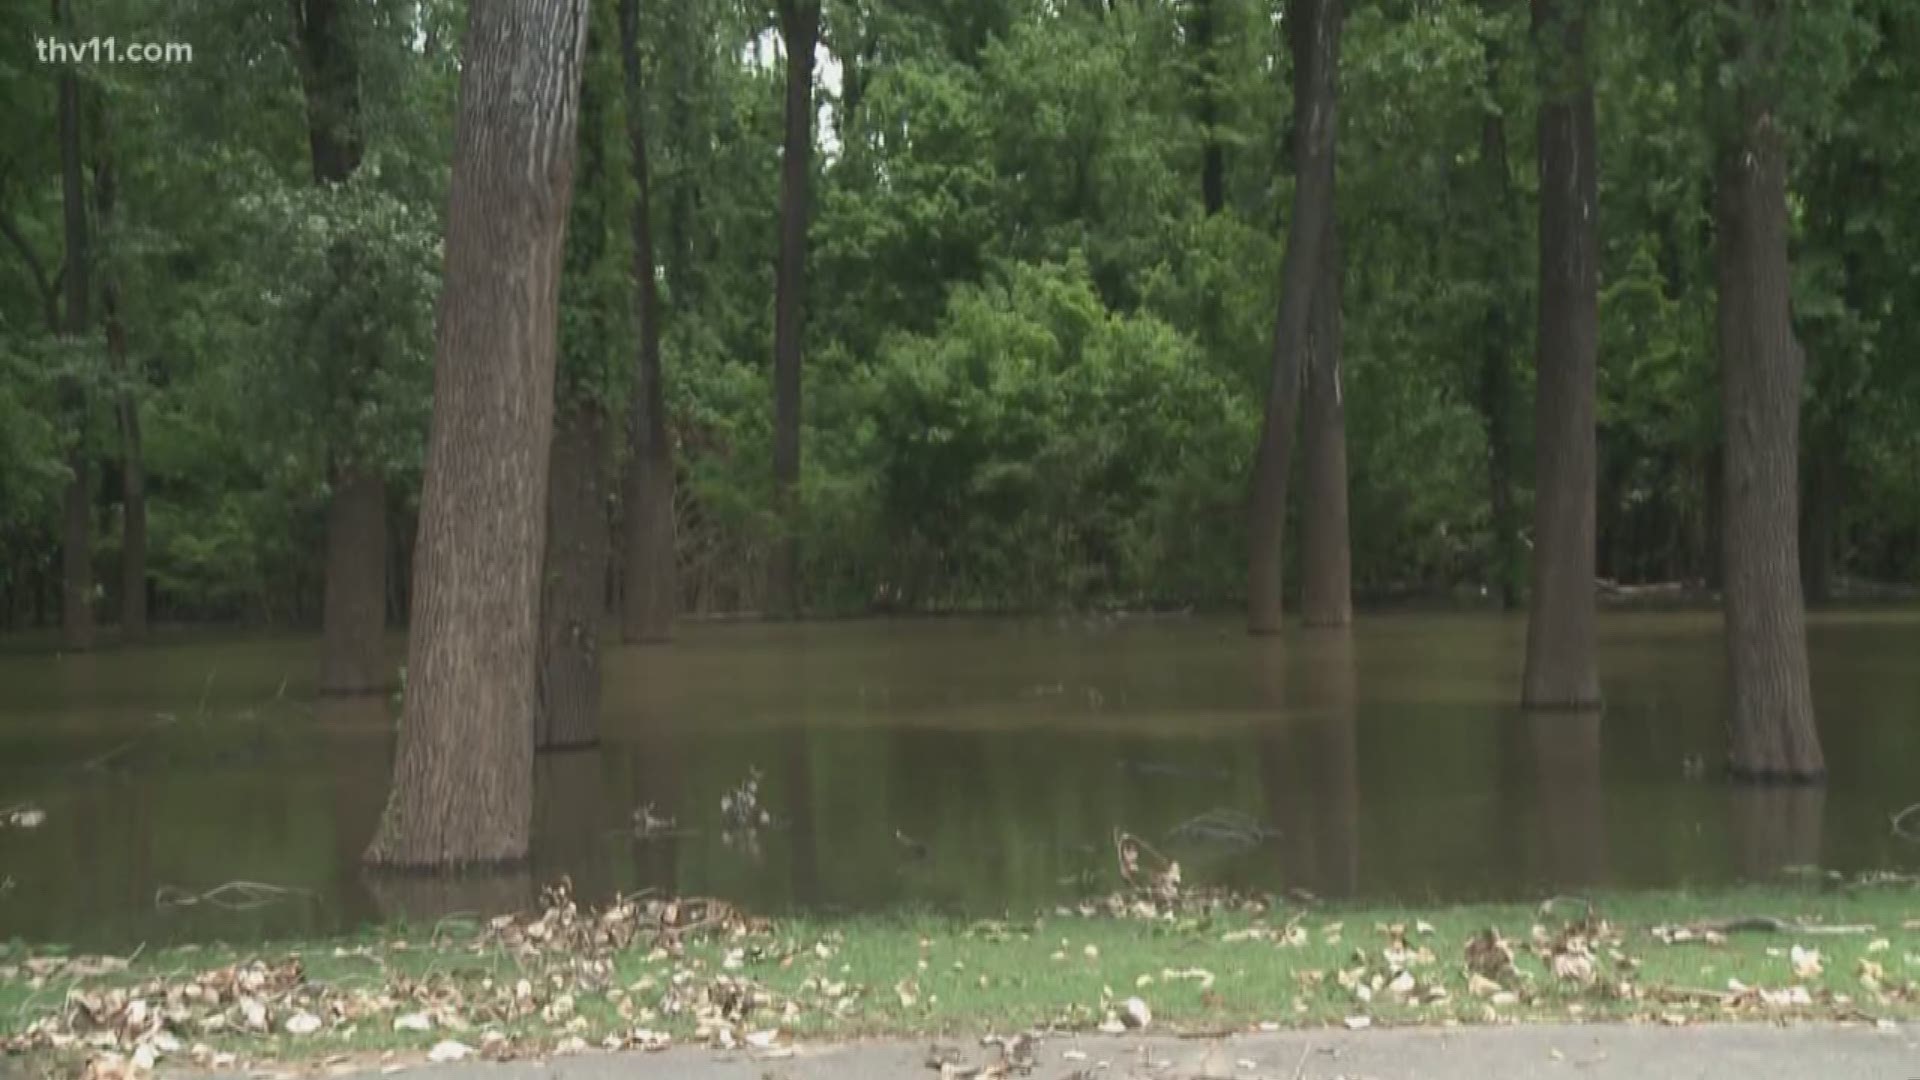 People haven’t been able to enjoy many of the parks in North Little Rock this summer after flooding.